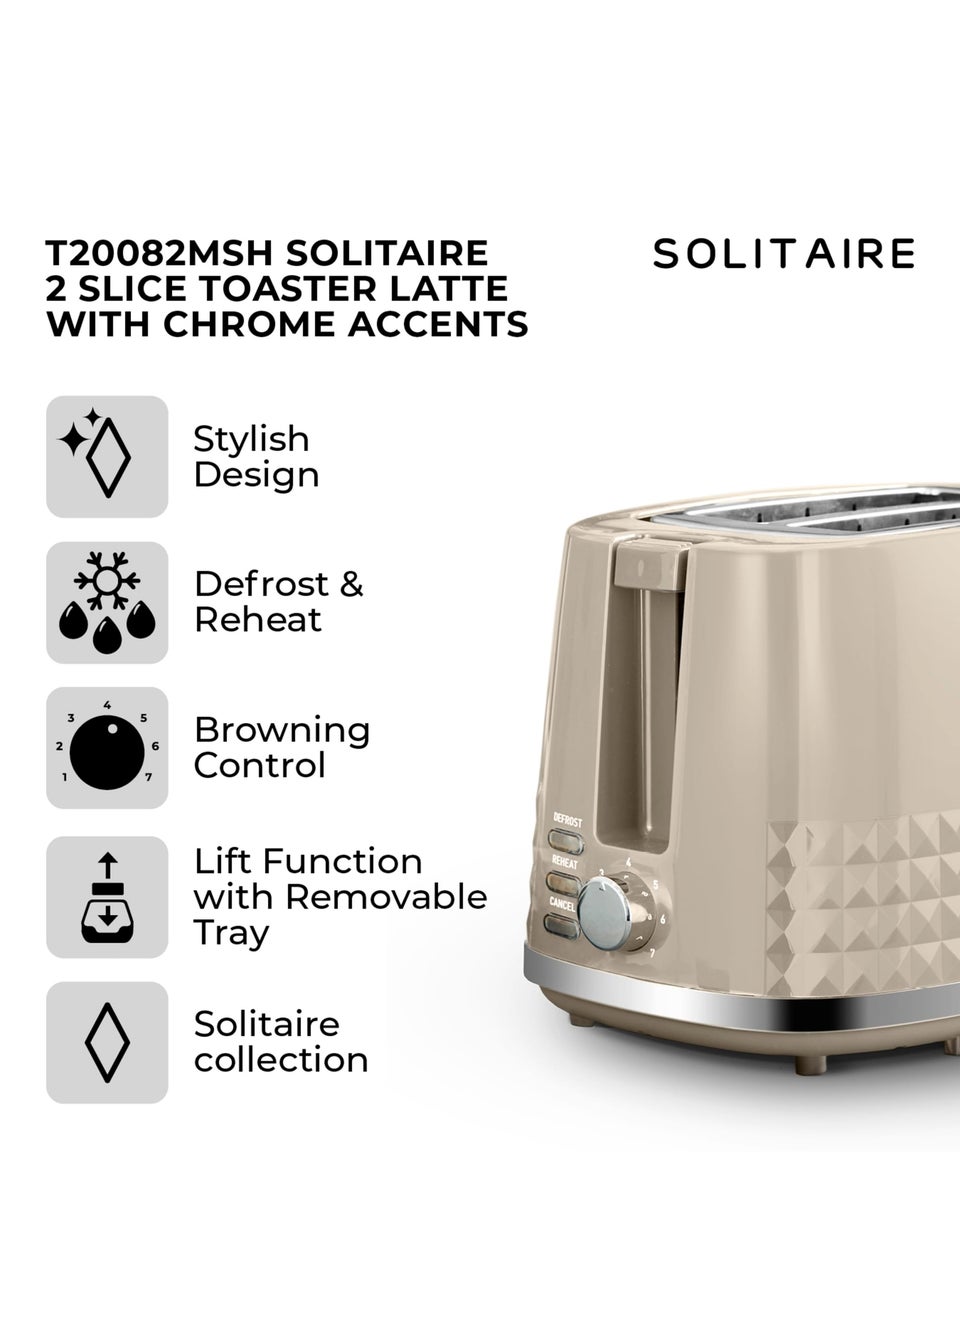 Tower Solitaire Latte 2 Slice Toaster